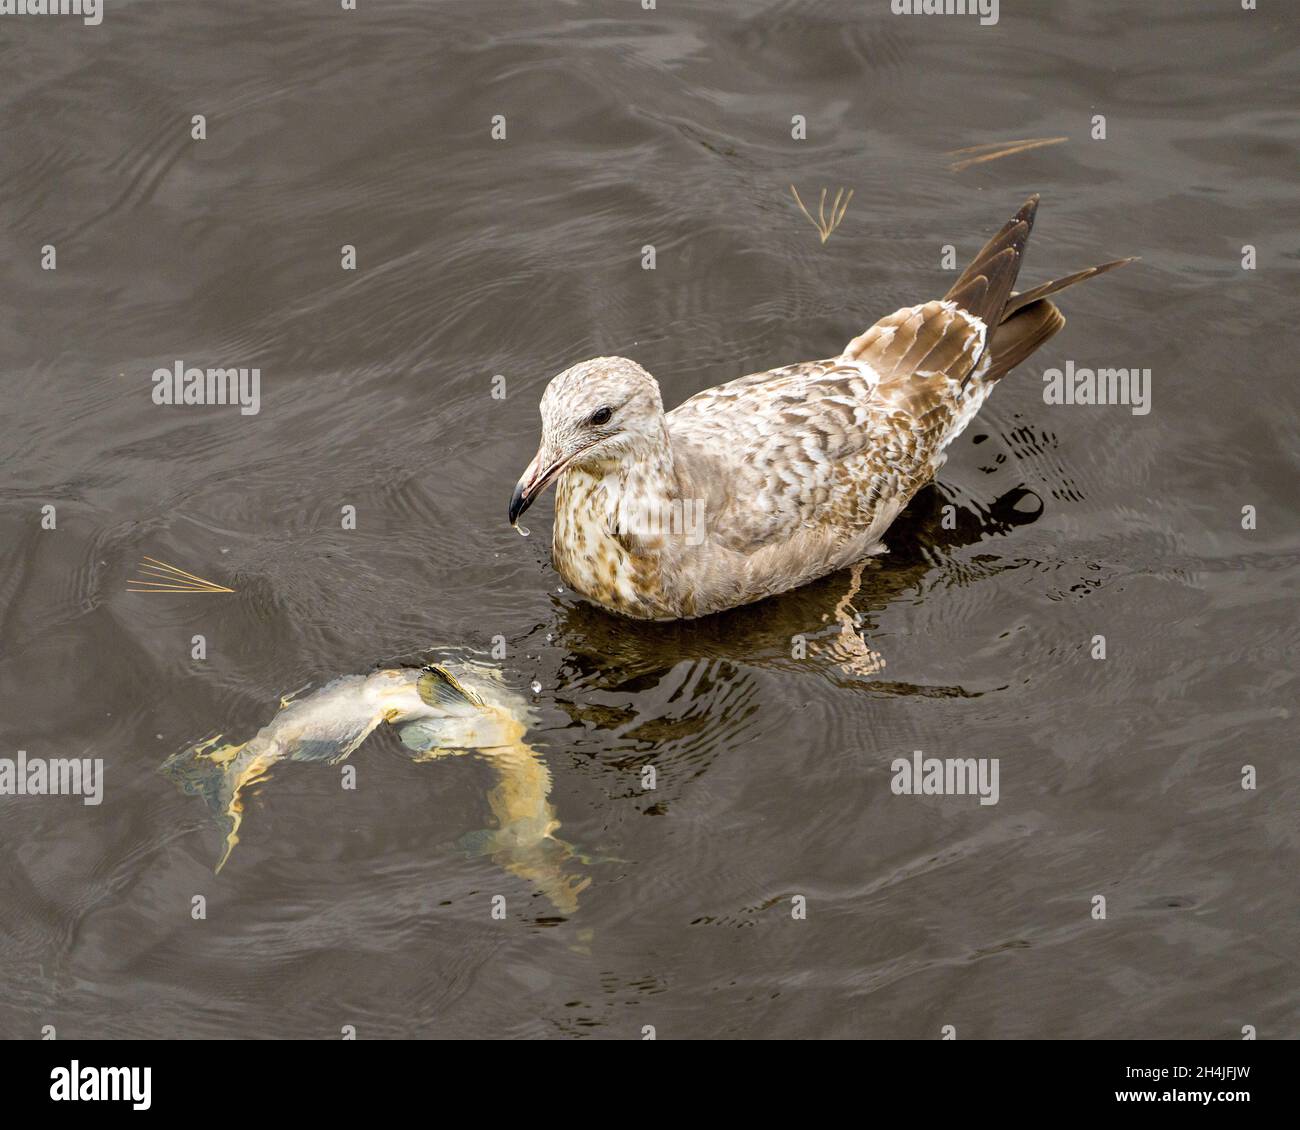 Seagull young juvenile bird close-up profile view swimming and feeding on a salmon fish in its environment and habitat surrounding. Stock Photo